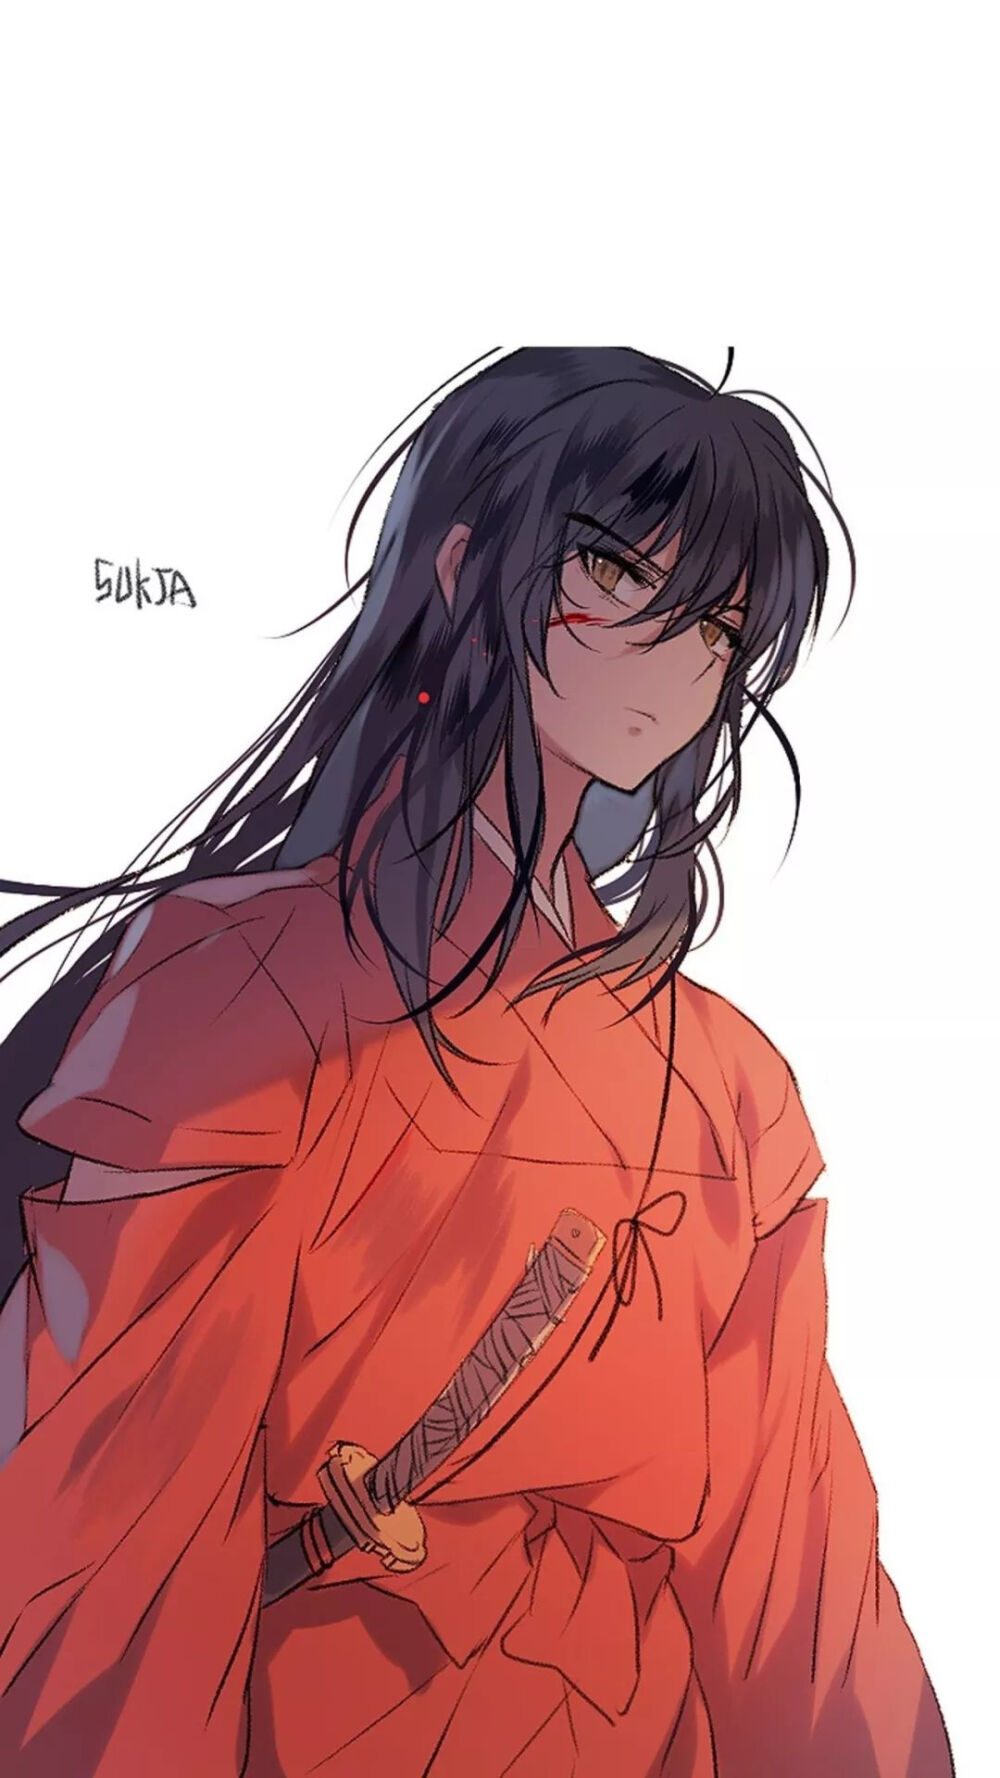 Top 20 Hottest Anime Guys with Long Hair Ranked 2023 - Seinen Manga